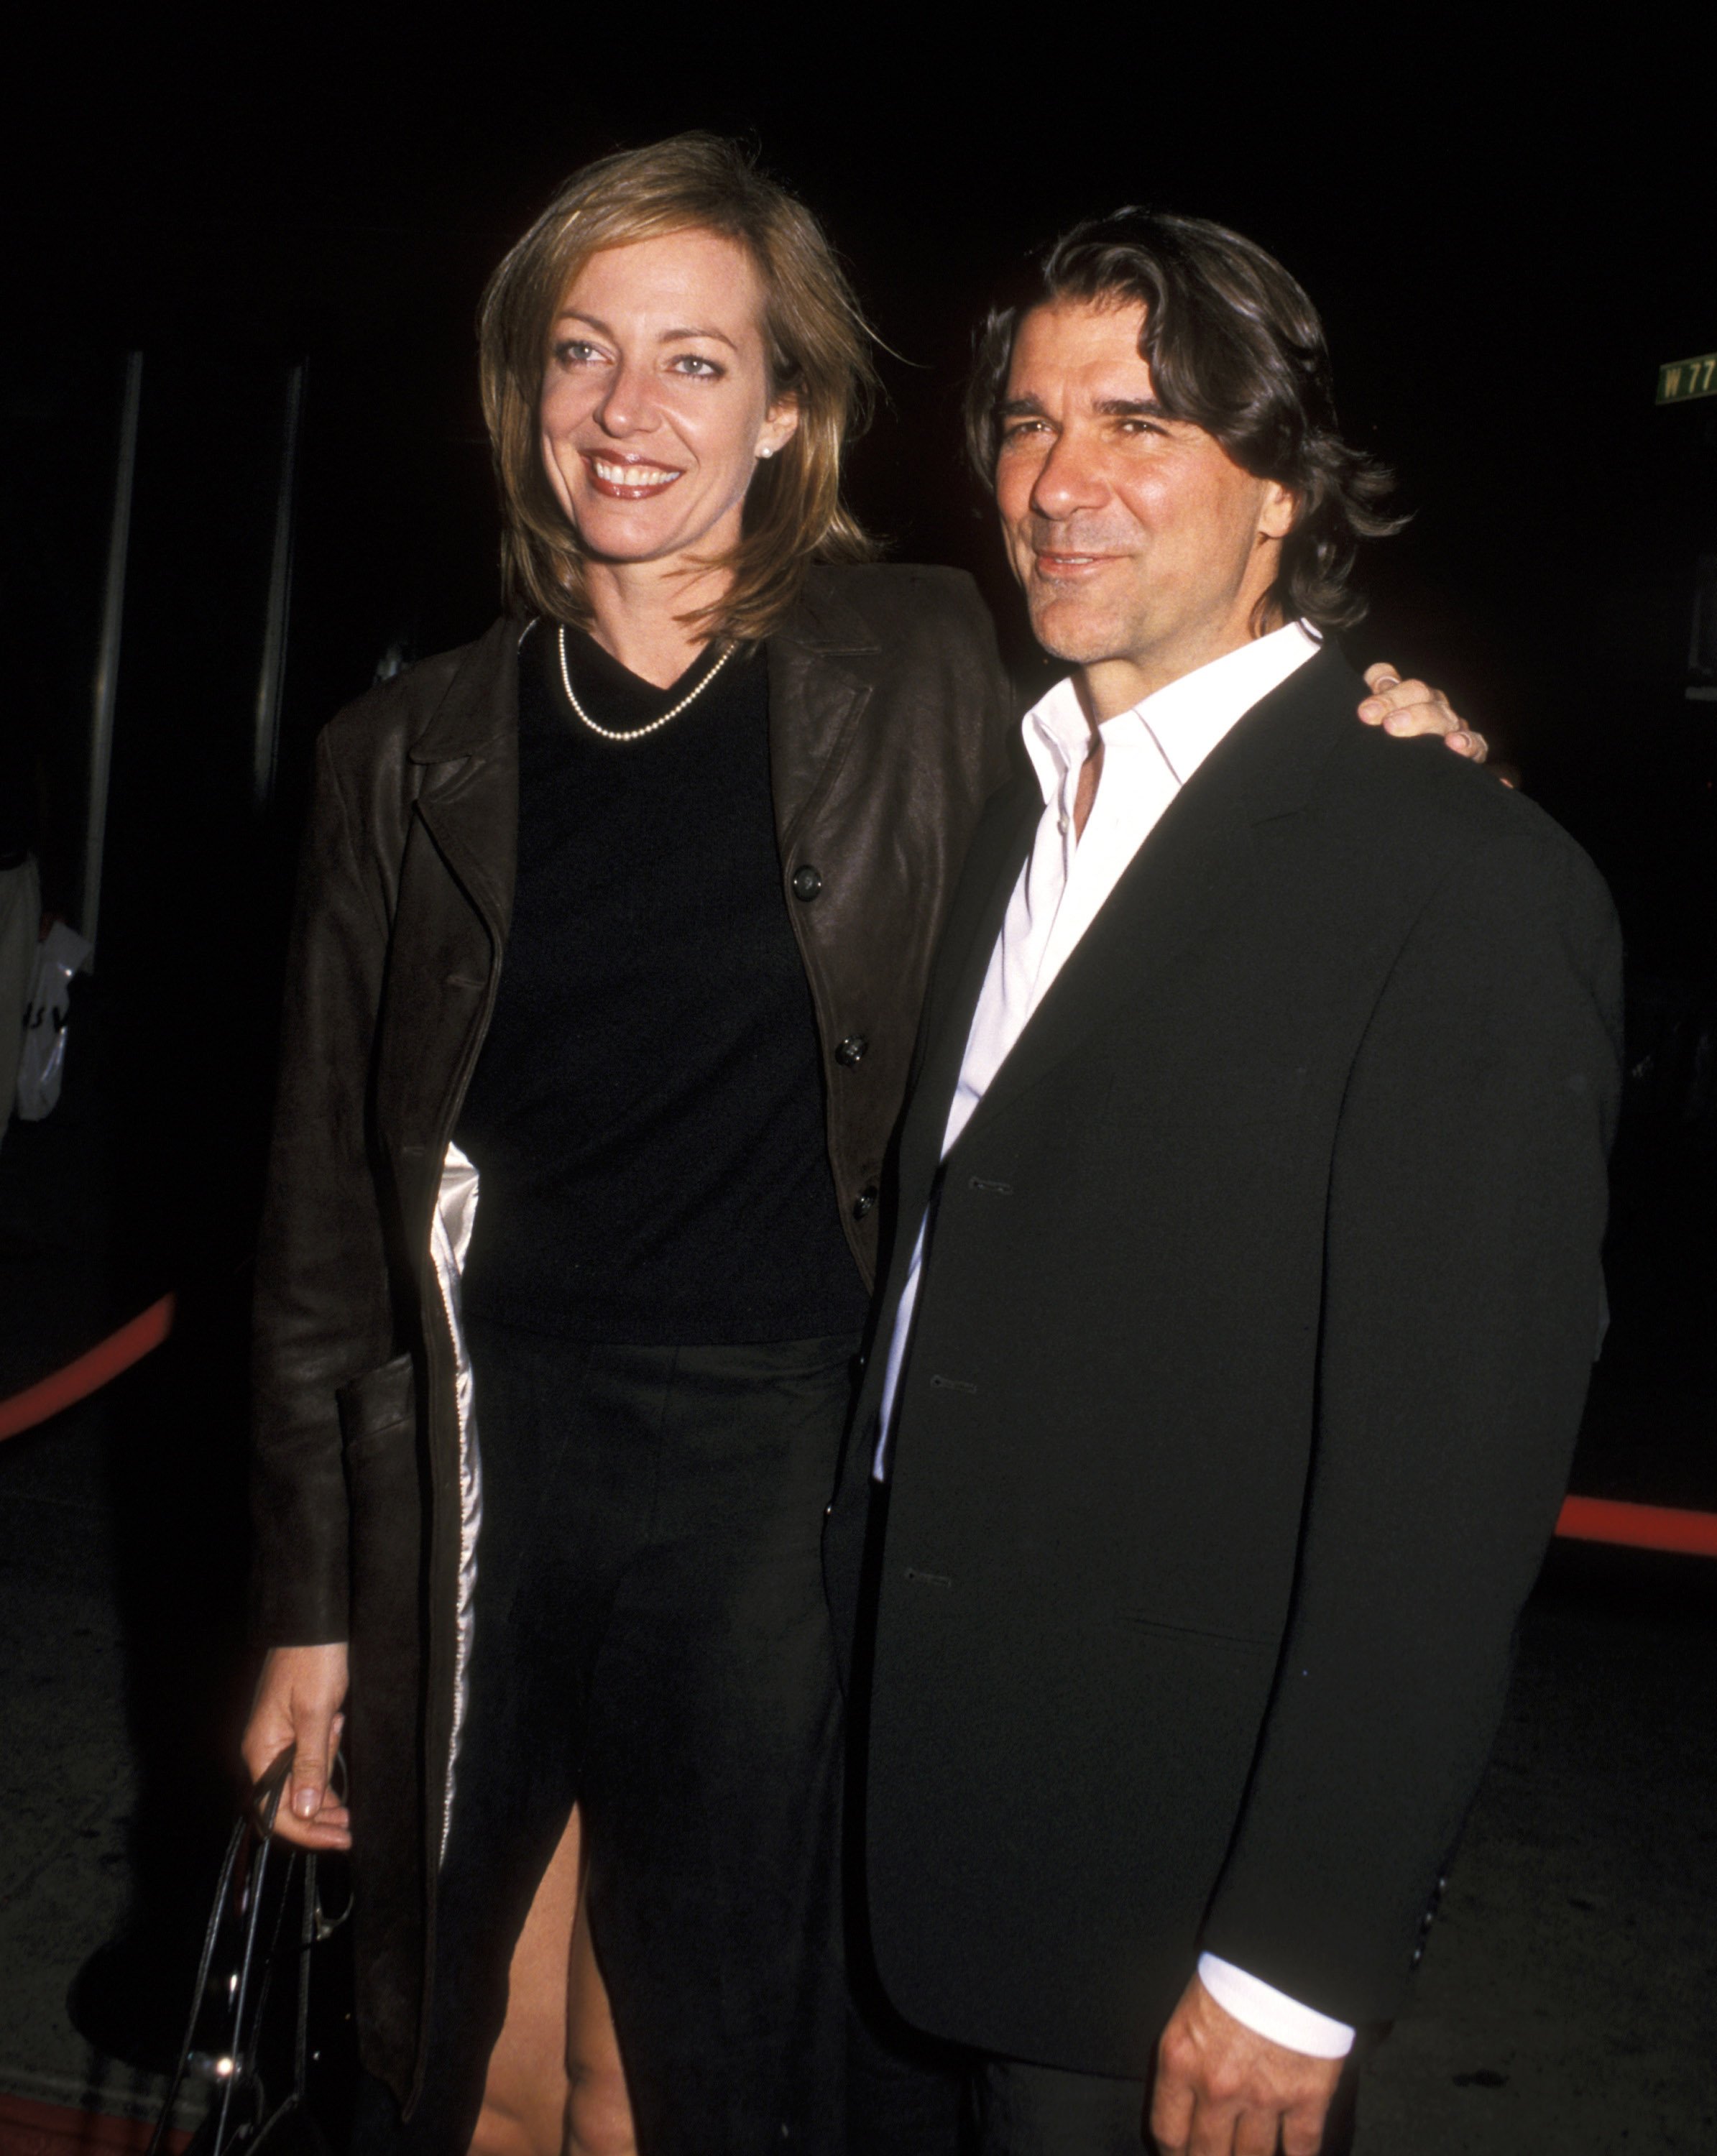 Allison Janney and Dennis Gagomiros attend the NBC Primetime Upfront Party on May 15, 2000 in New York City. | Source: Getty Images